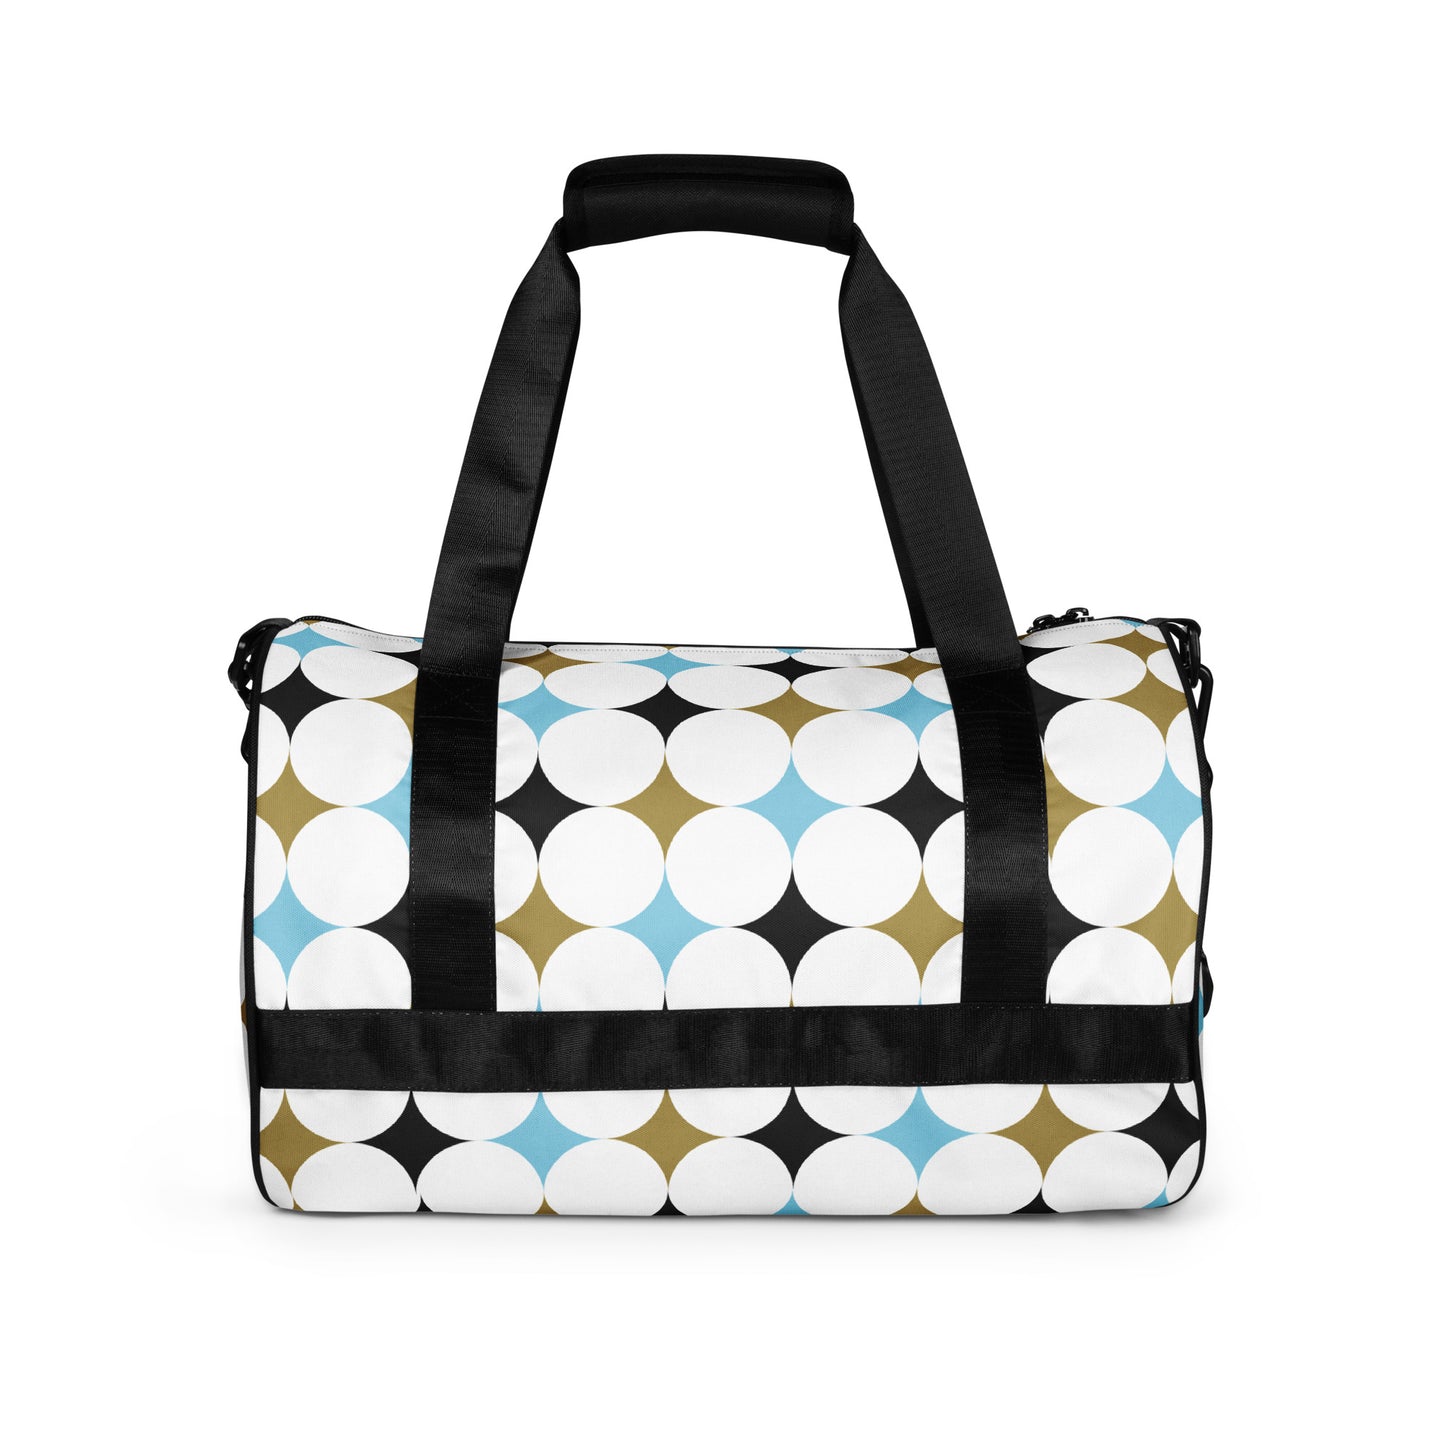 Retro Rounded Pattern - Sustainably Made Gym Bag